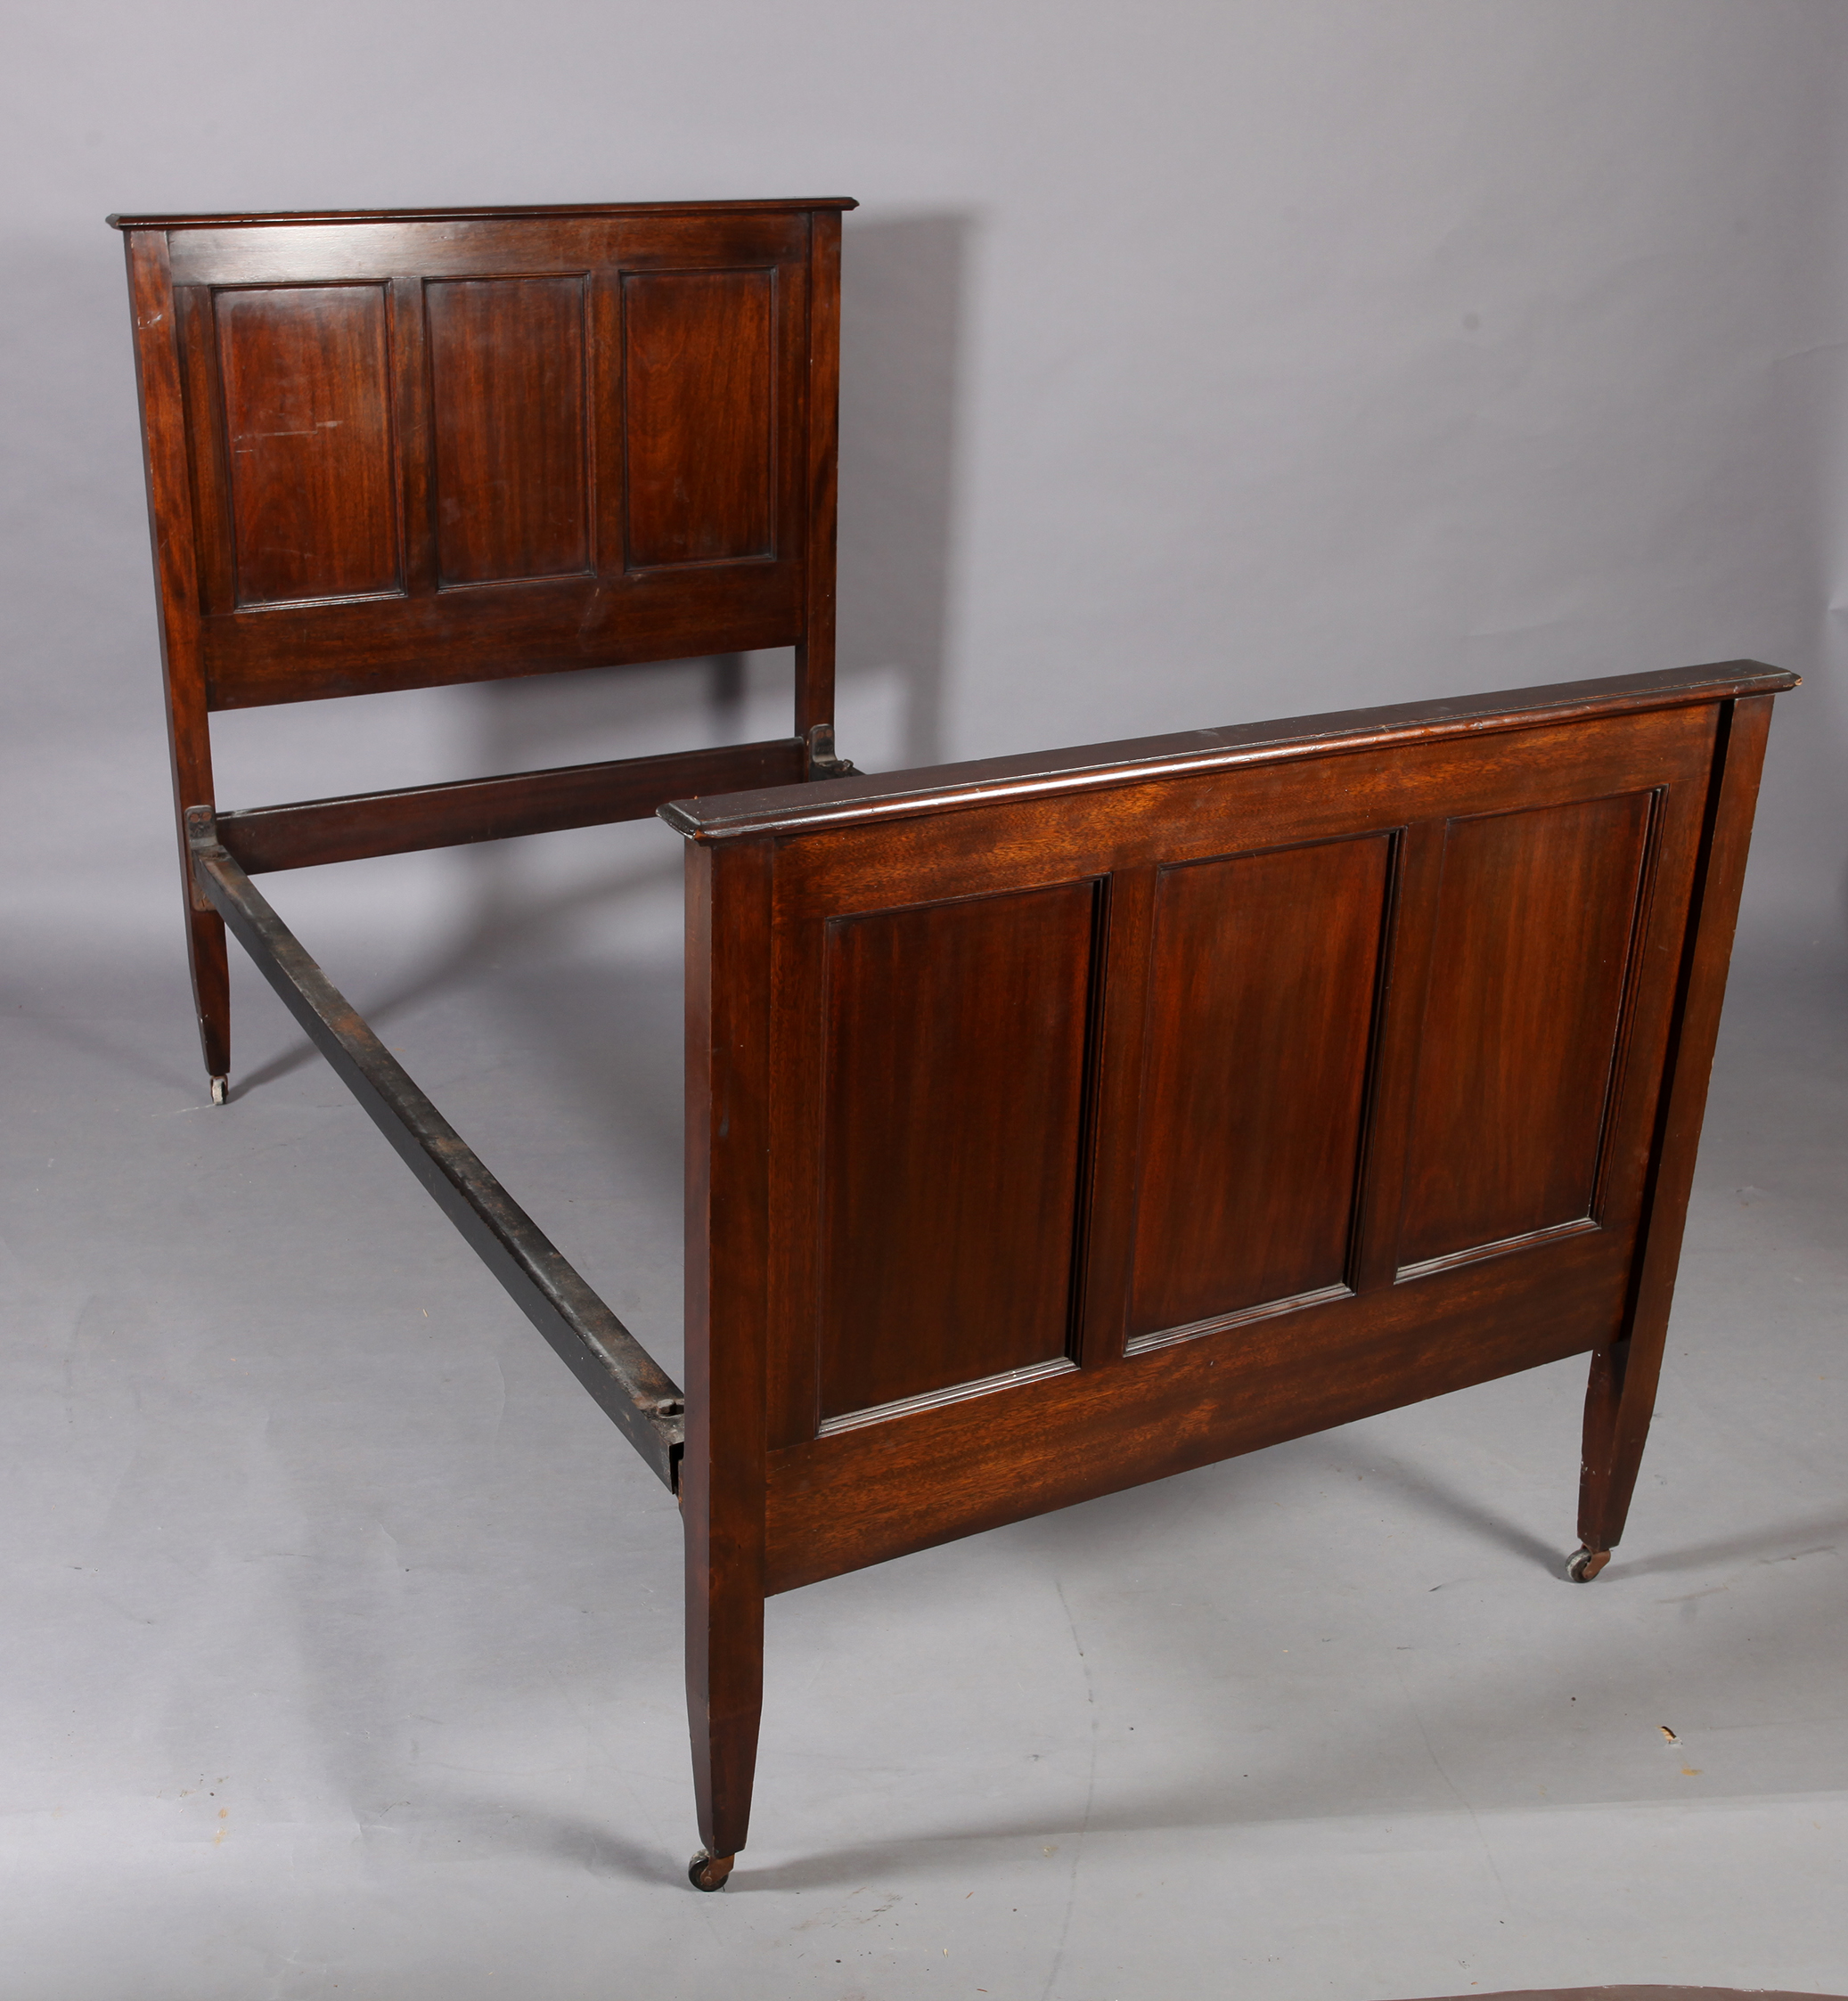 A Victorian walnut double bedstead with figured panels and railed headboard together with an - Image 3 of 6